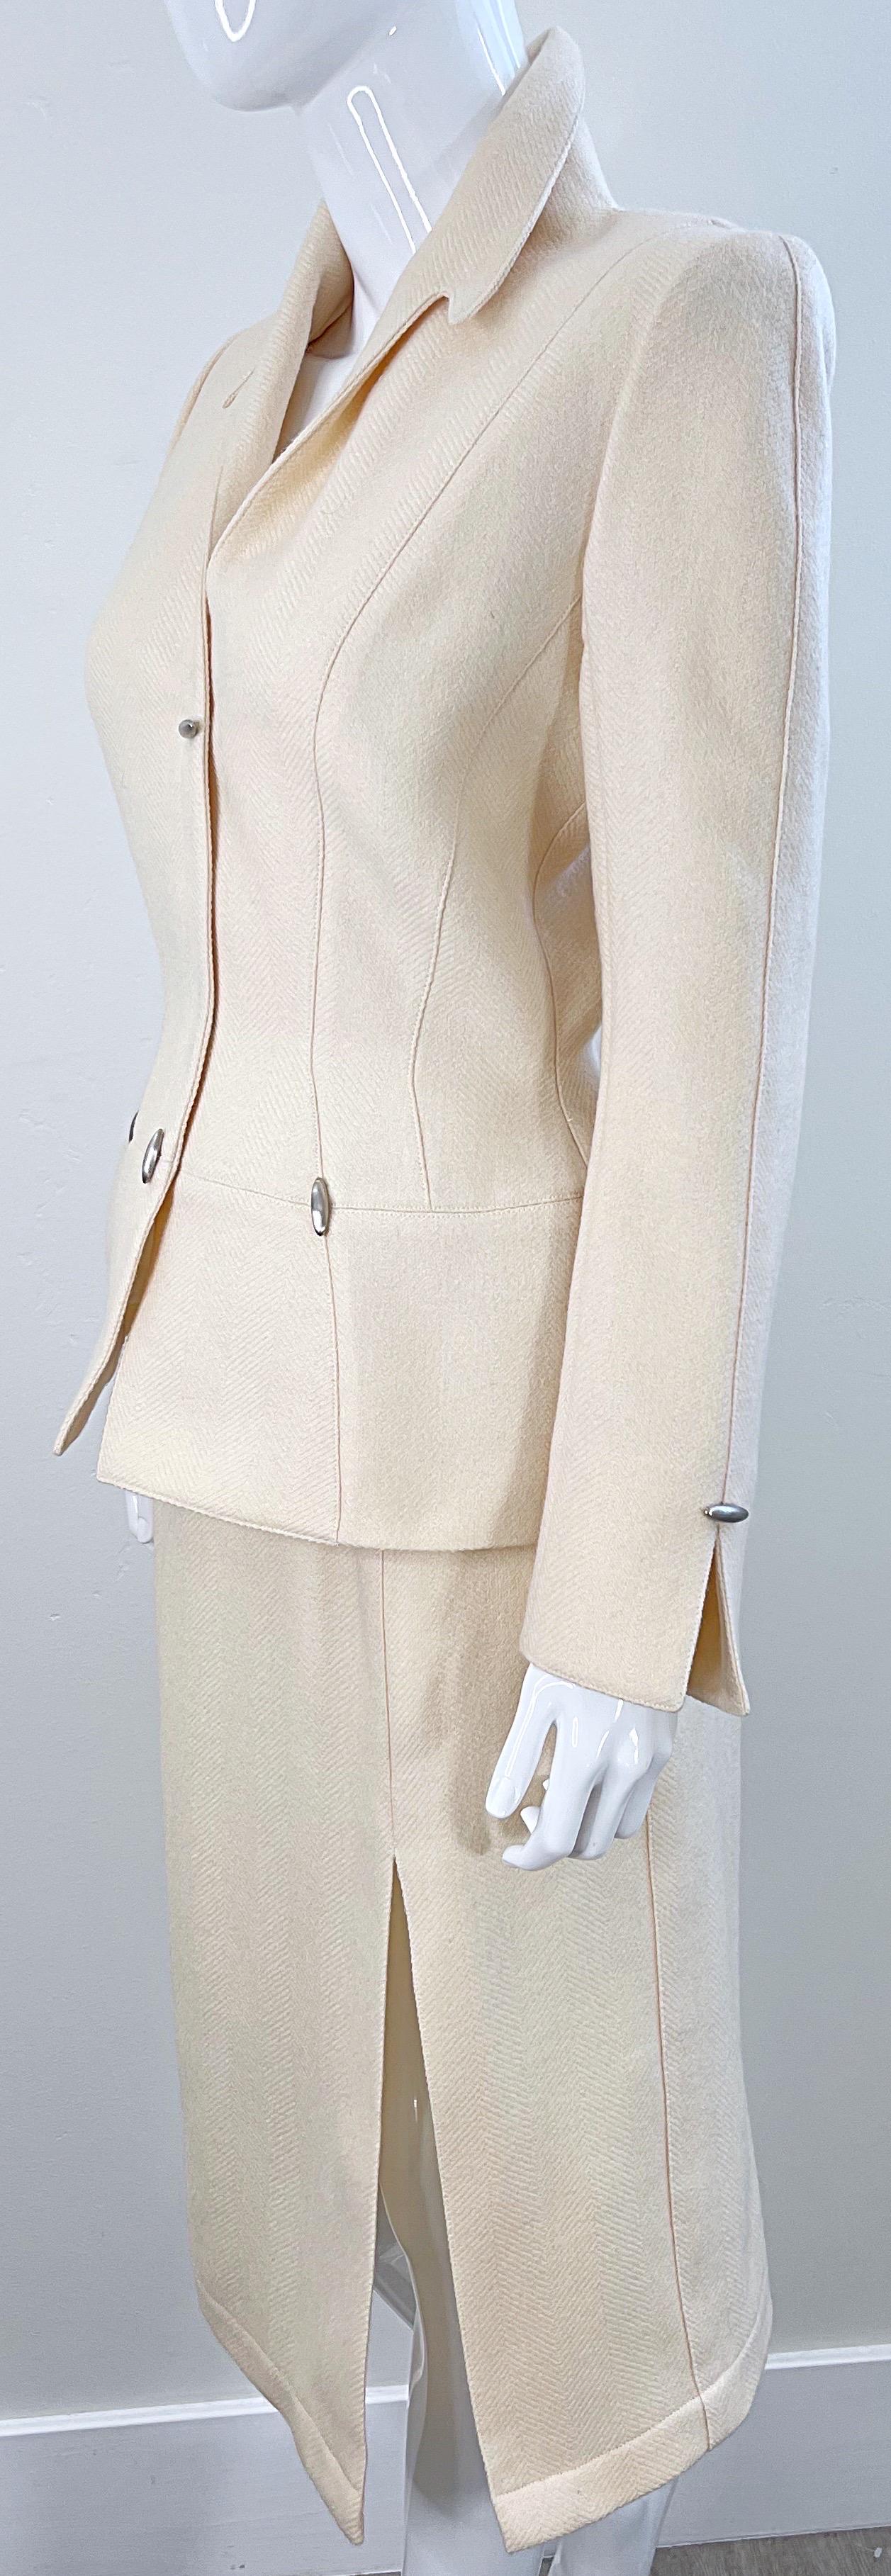 Vintage Thierry Mugler F/W 1989 Ivory Size 4 / 6 Wool Silver Bullet Skirt Suit  For Sale 4